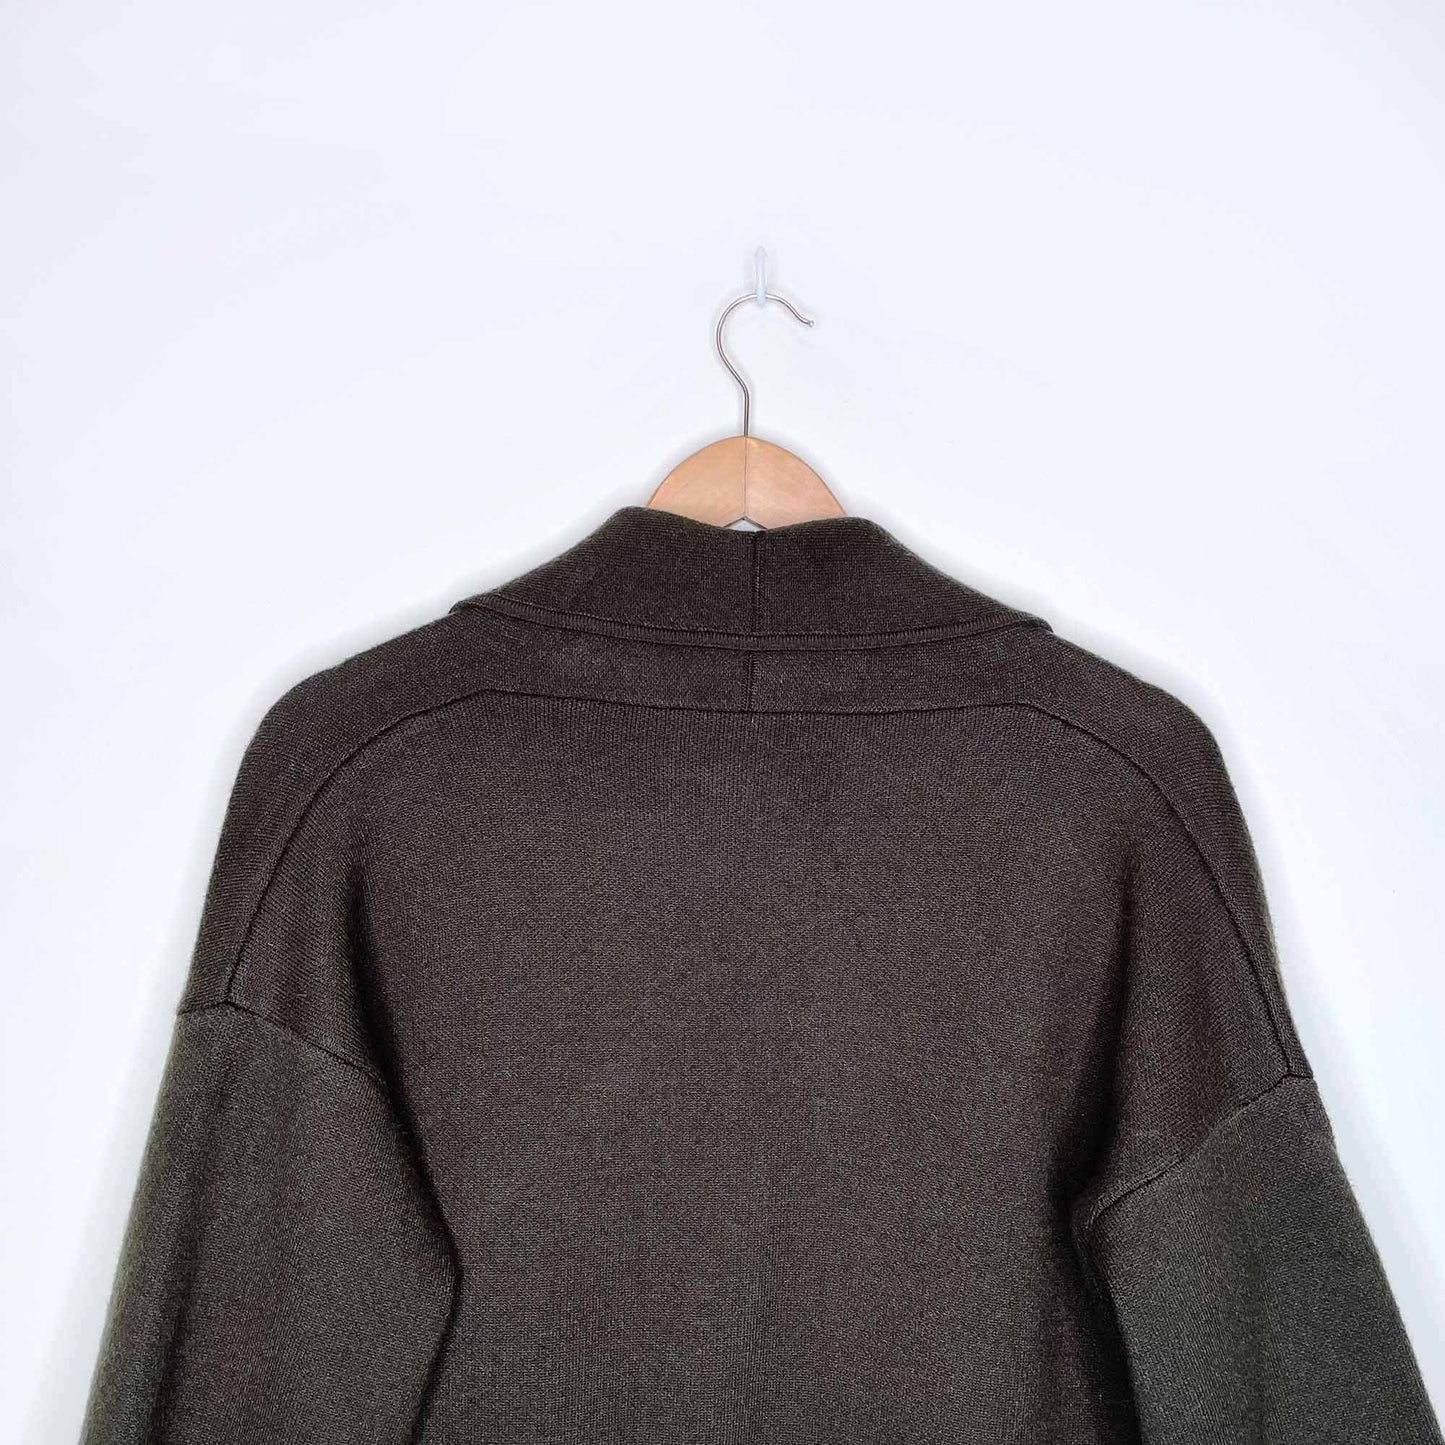 wool-cashmere knit sweater jacket with gathered cuff - size sm/med